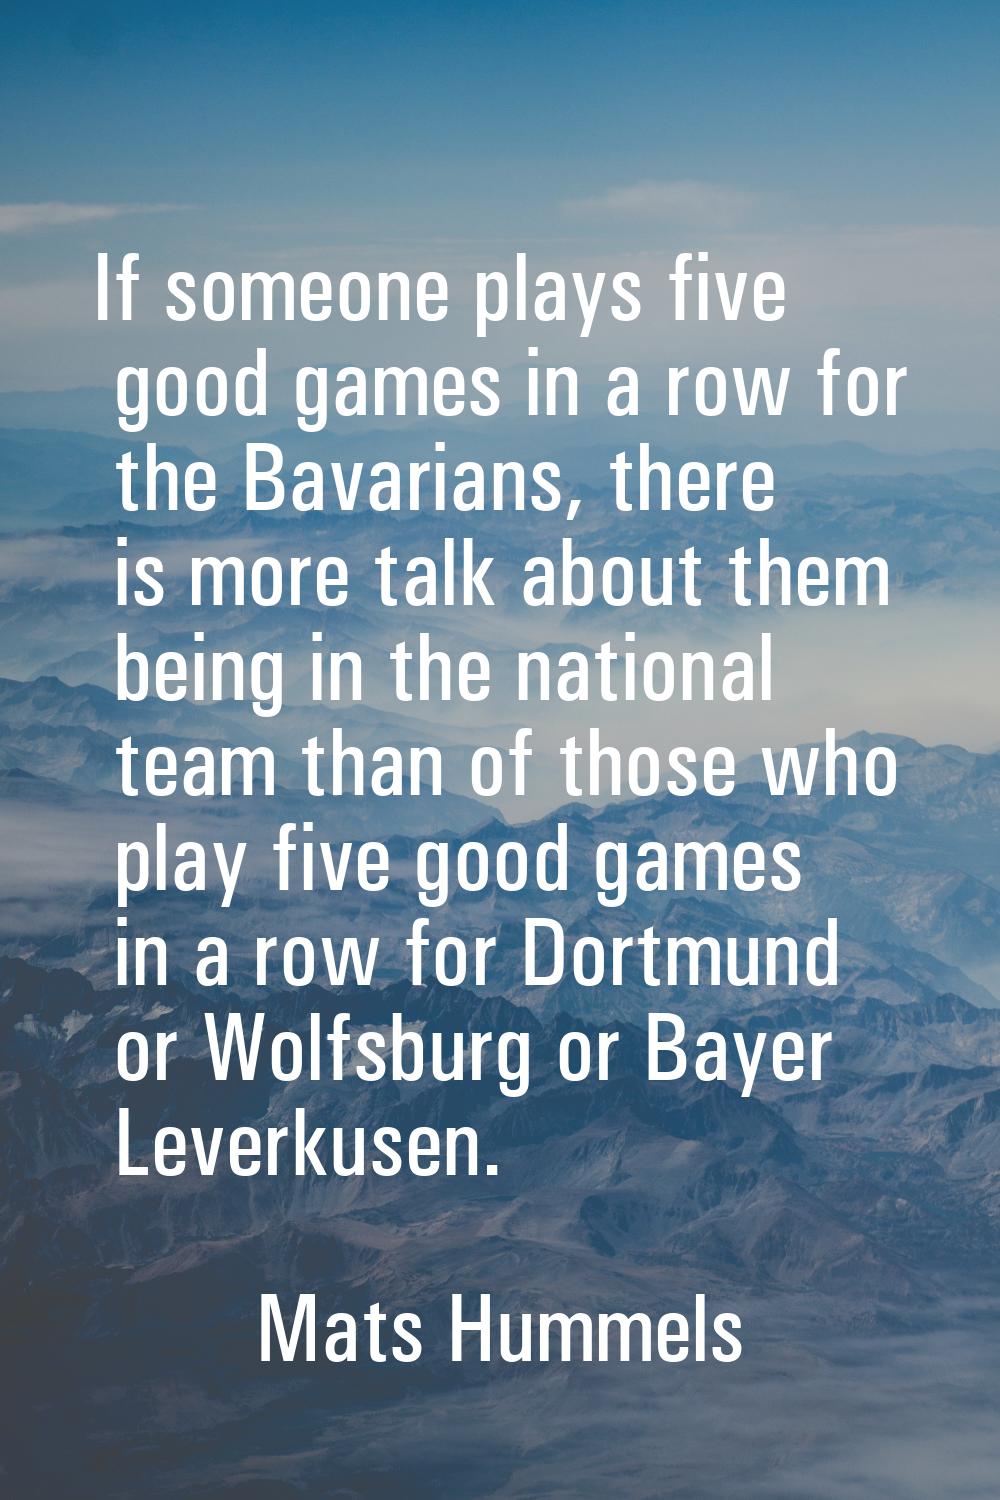 If someone plays five good games in a row for the Bavarians, there is more talk about them being in